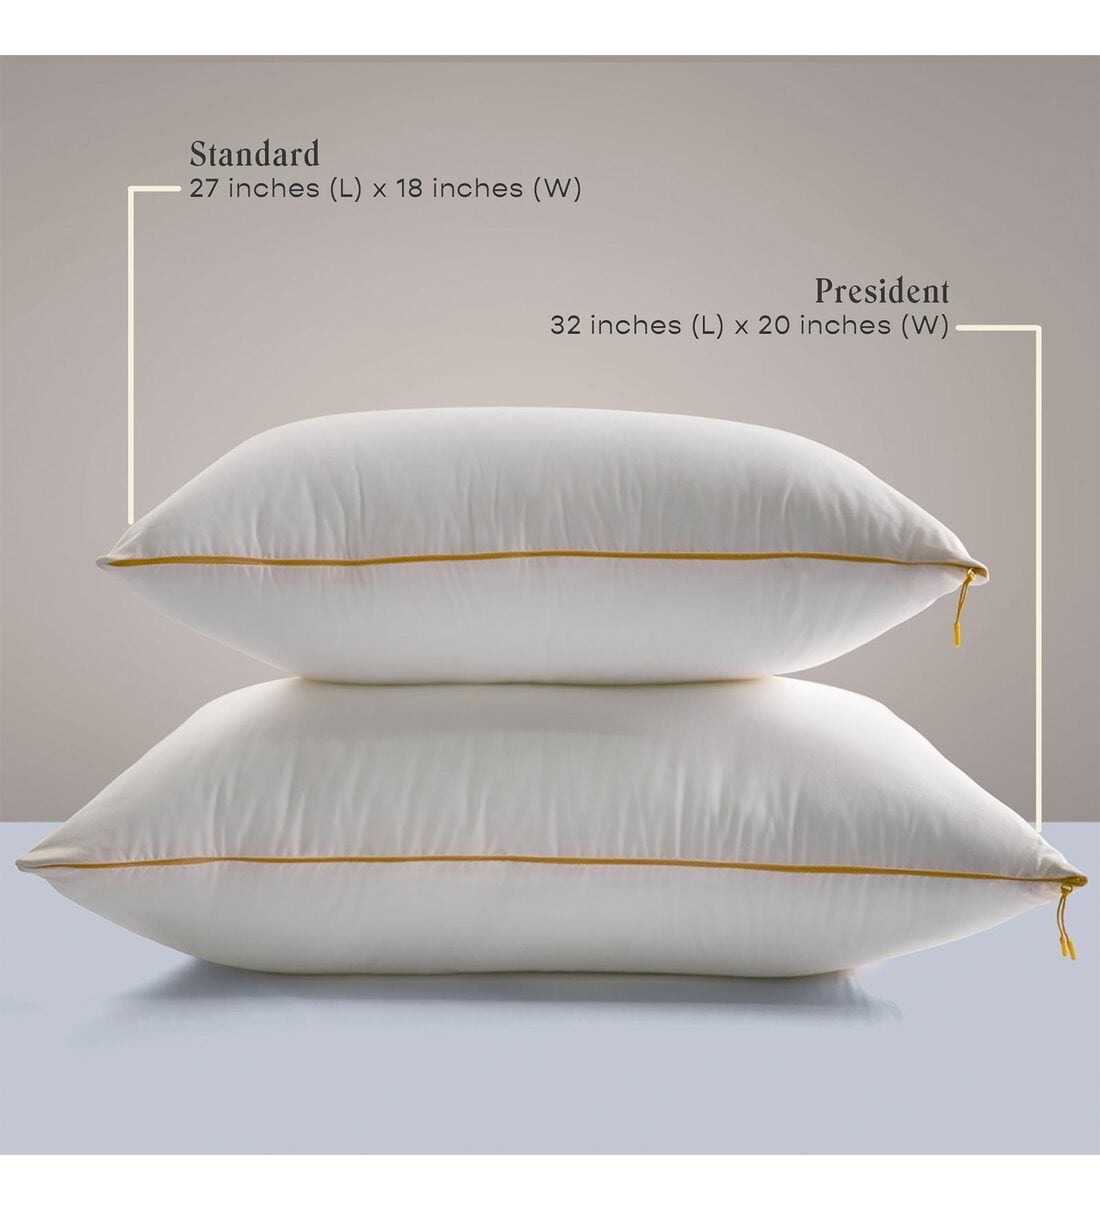 Buy Restofit Microfiber Cloud Sleeping Pillows with Adjustable Zipper, Set  of 4 (Standard Size, 26x16 Inches)